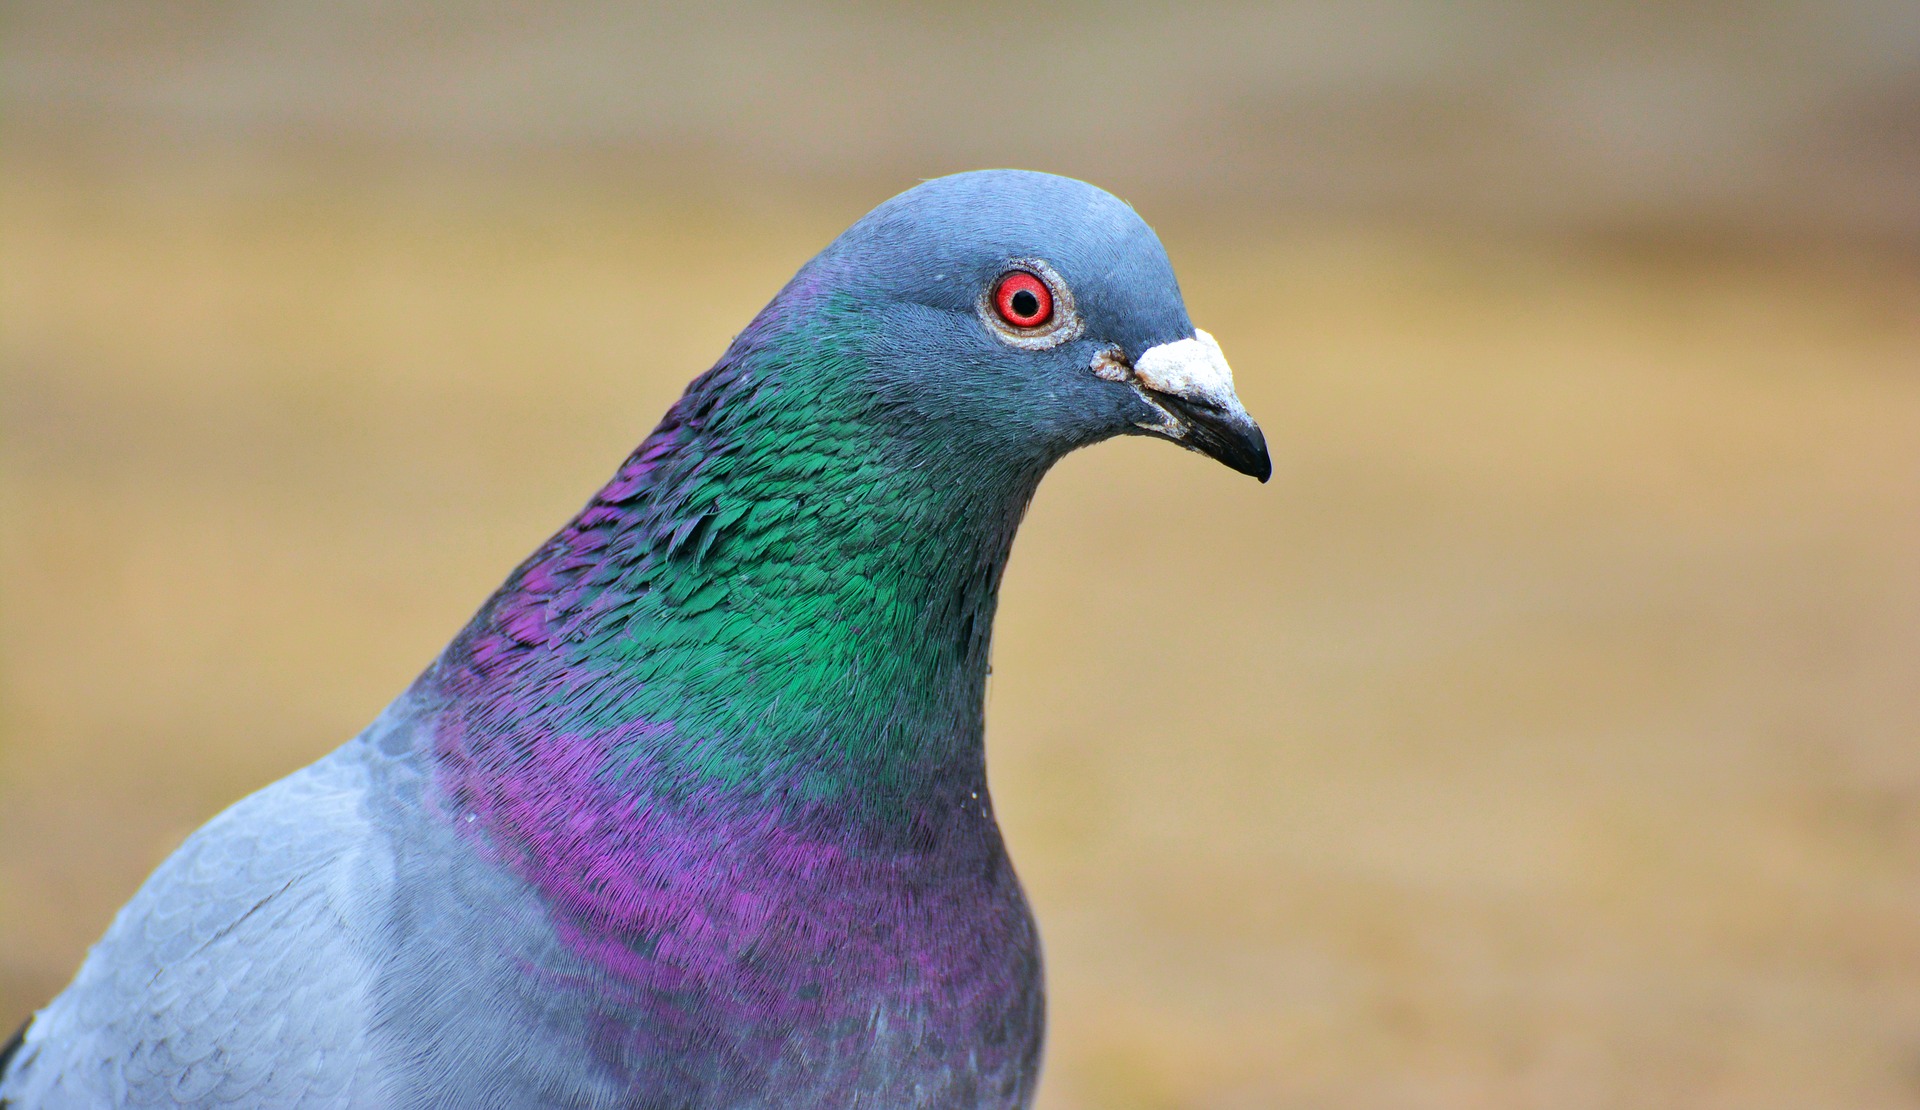 Just a pigeon